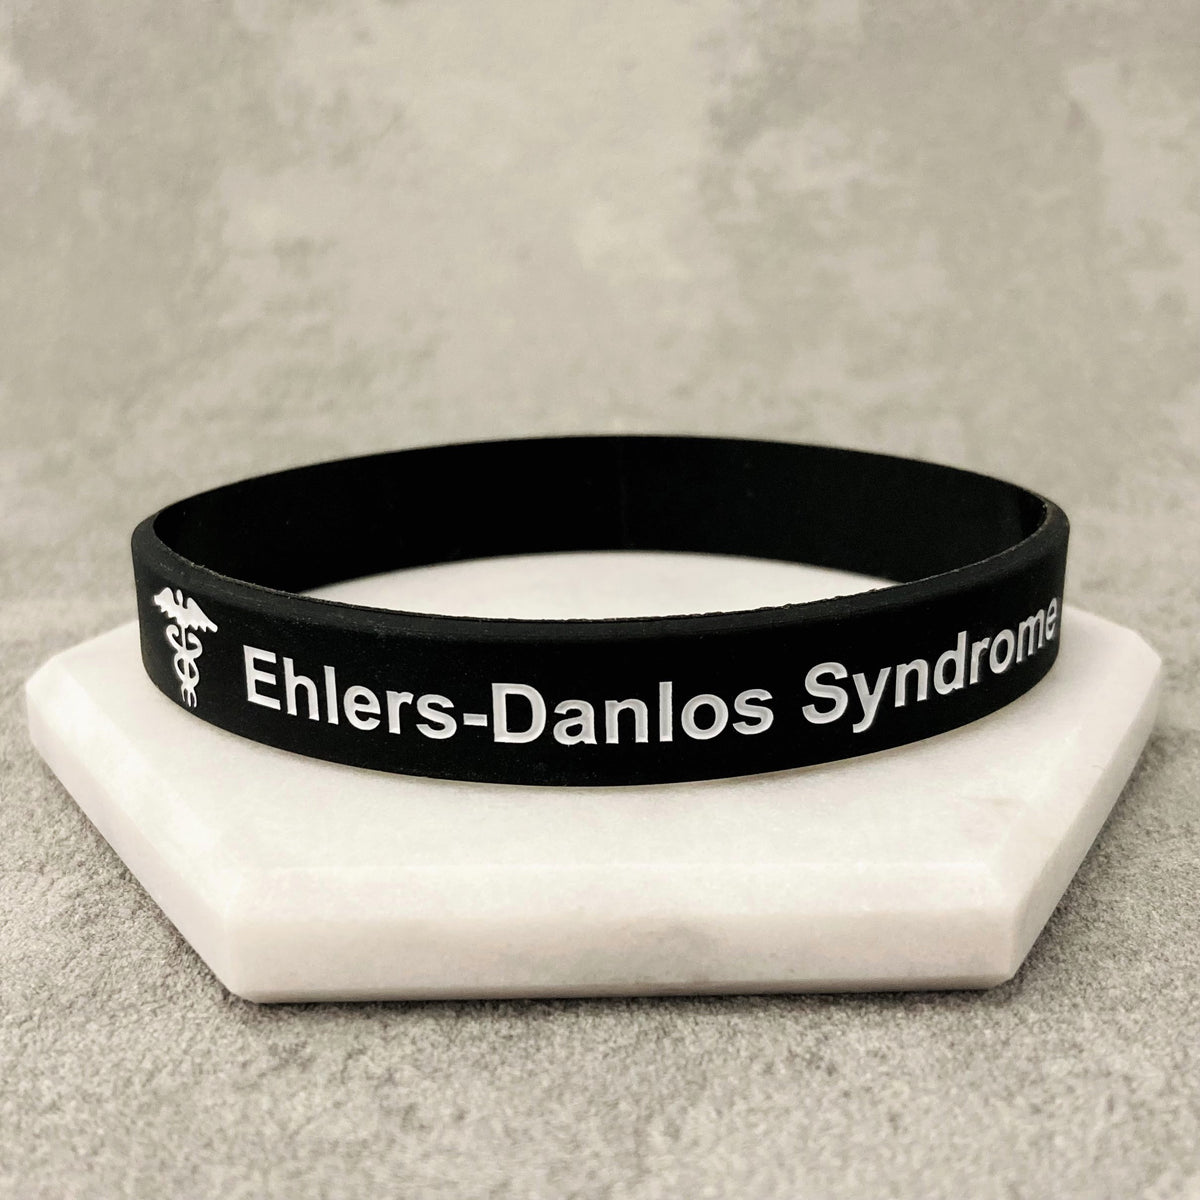 ehlers danlos syndrome wristband medic alert id womens